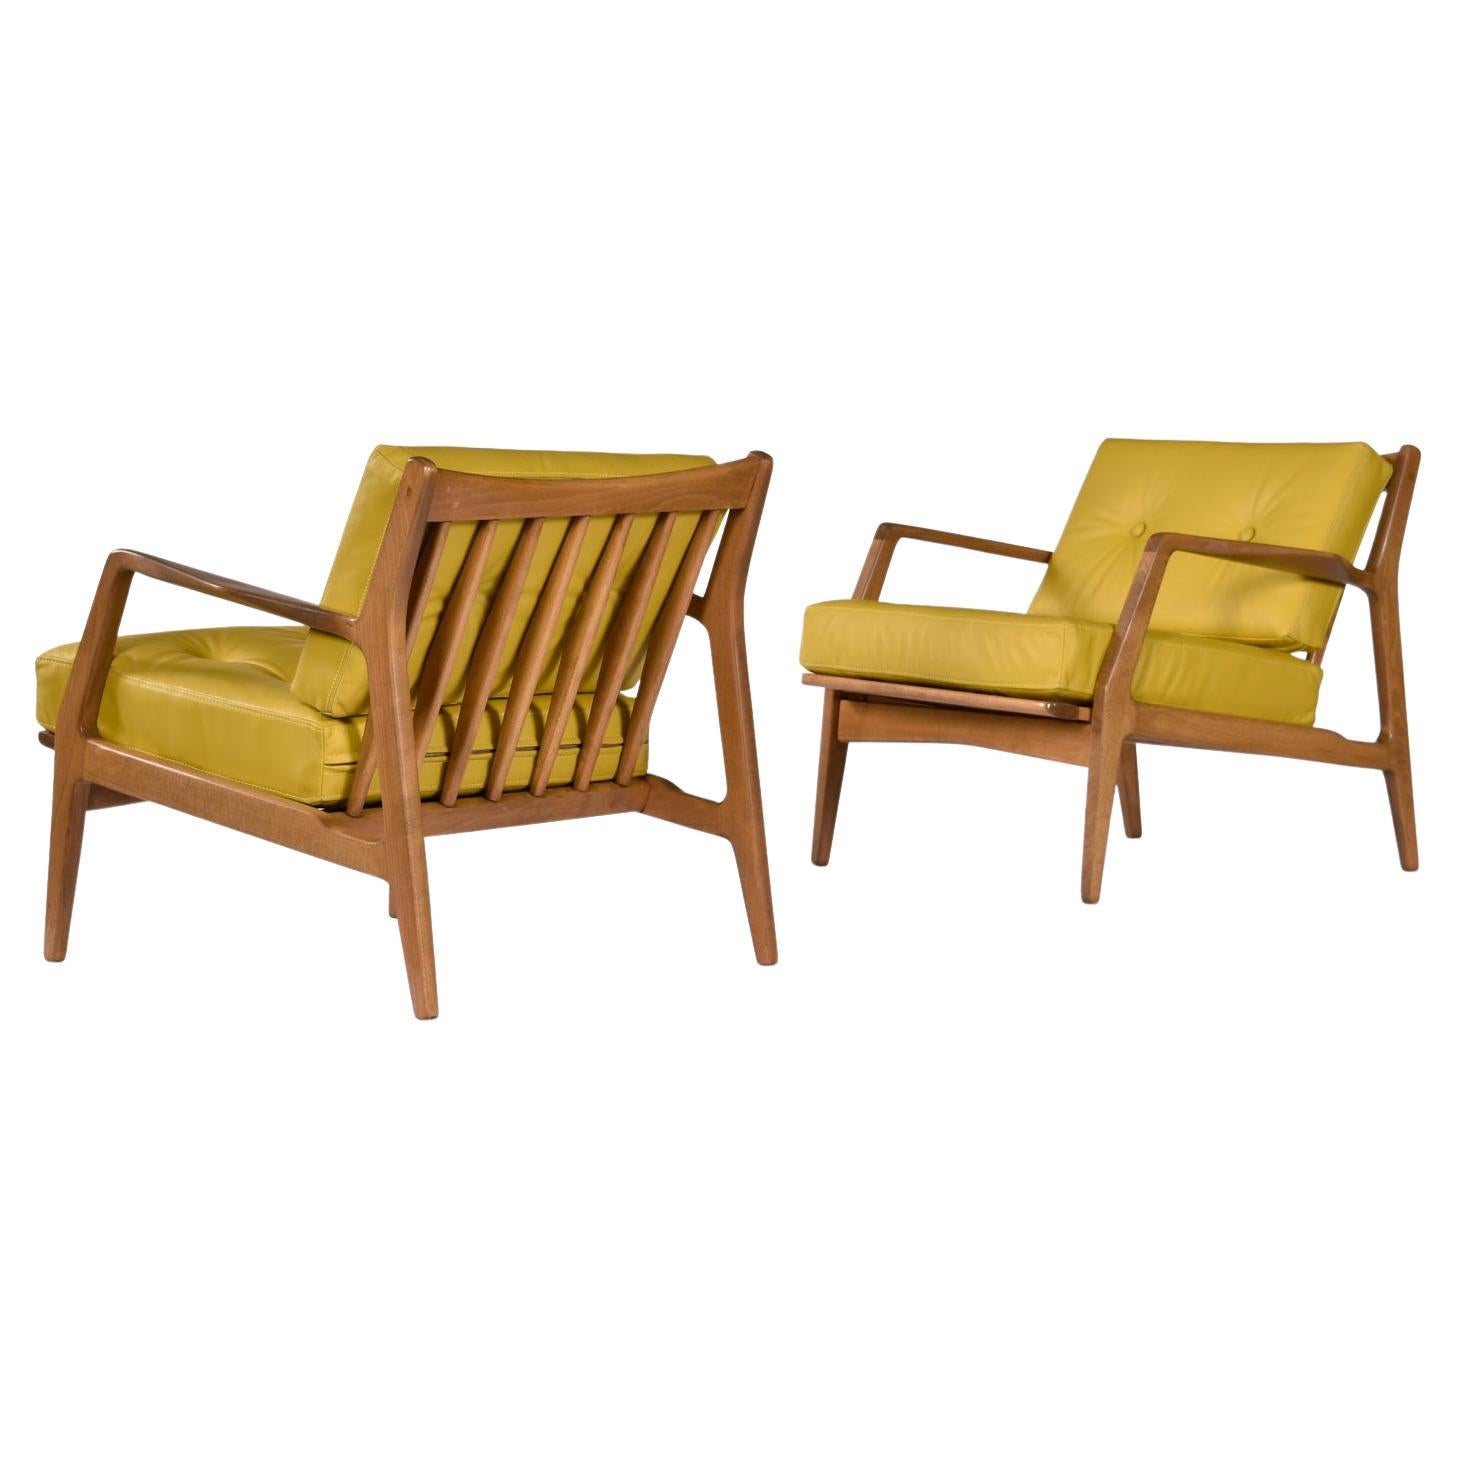 Pair of Mid-Century Modern Number 596 lounge chairs designed by Lawrence Peabody for Selig. Professionally reupholstered in full grain flaxen-yellow leather. These timeless lounge chair exudes the quintessential Mid-Century Modern style that has